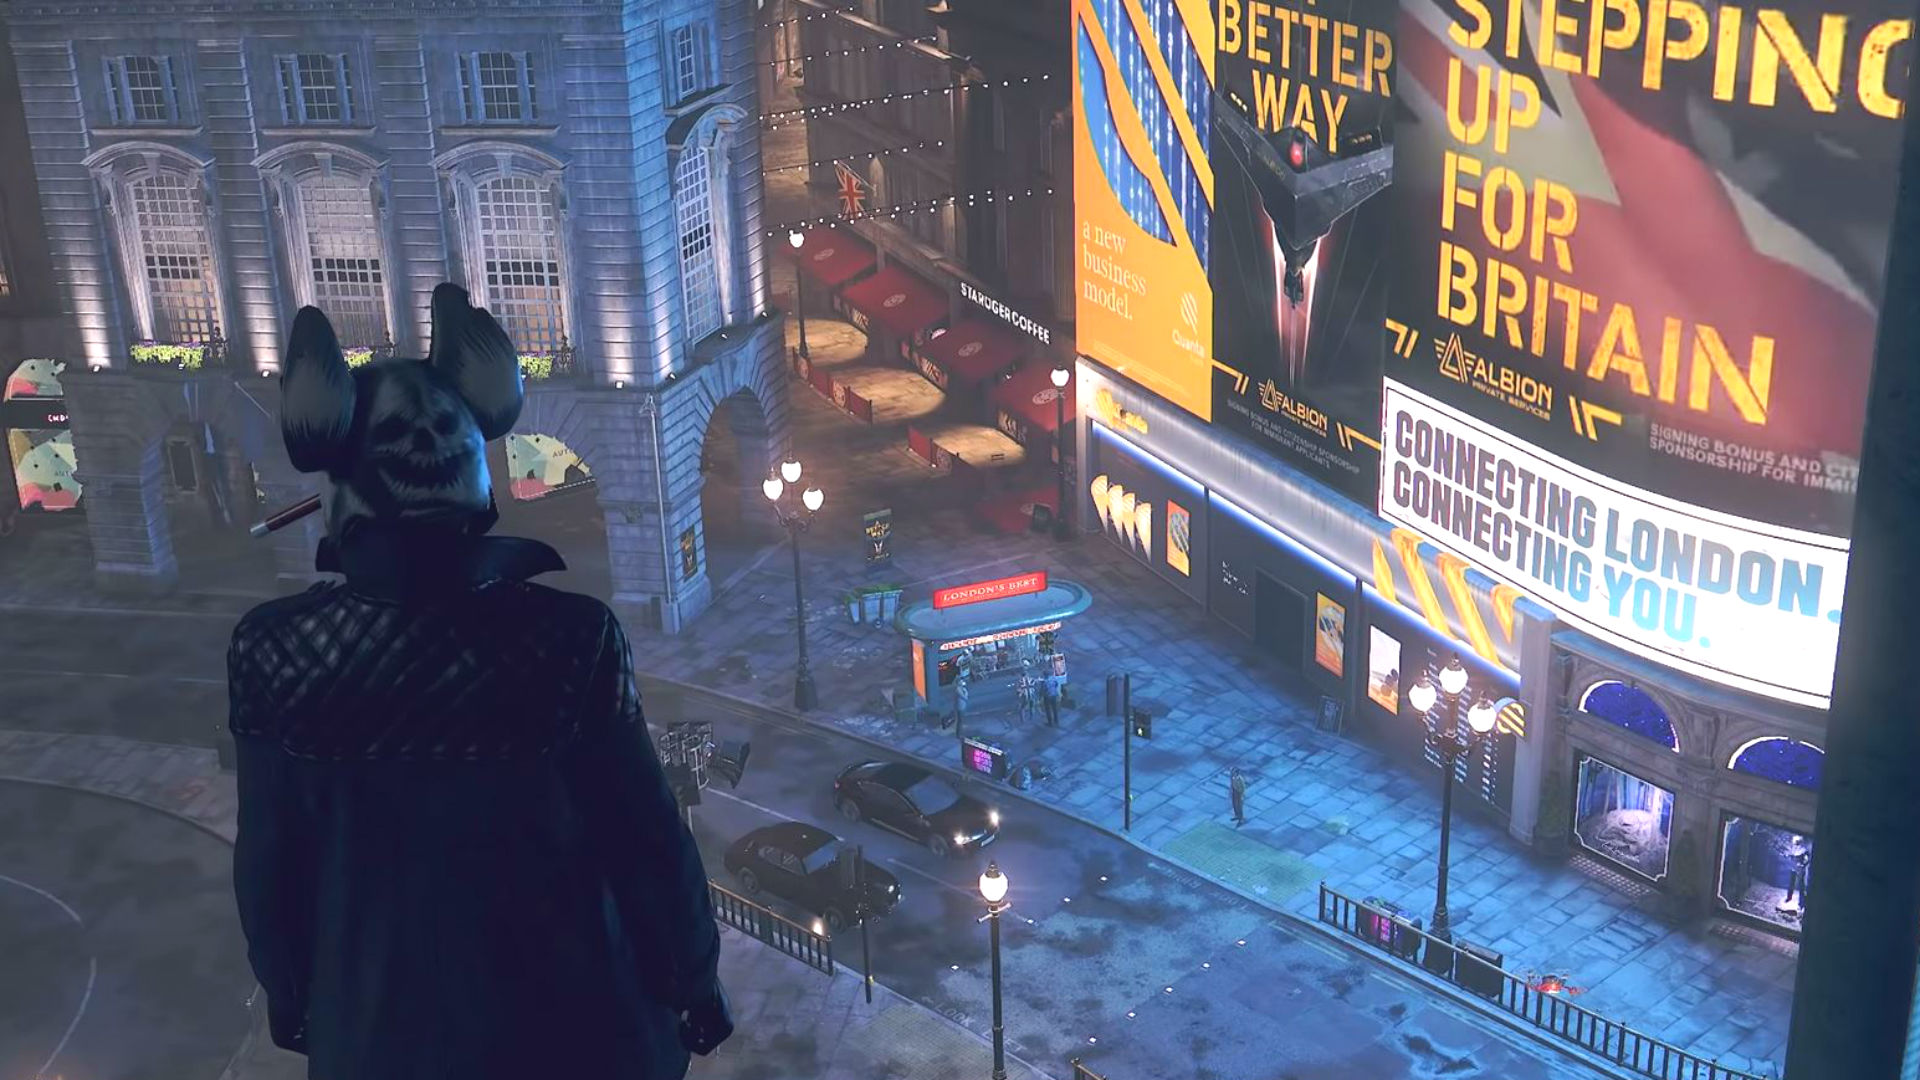 Watch Dogs Legion was to be set in London “before the vote” on Brexit | PCGamesN